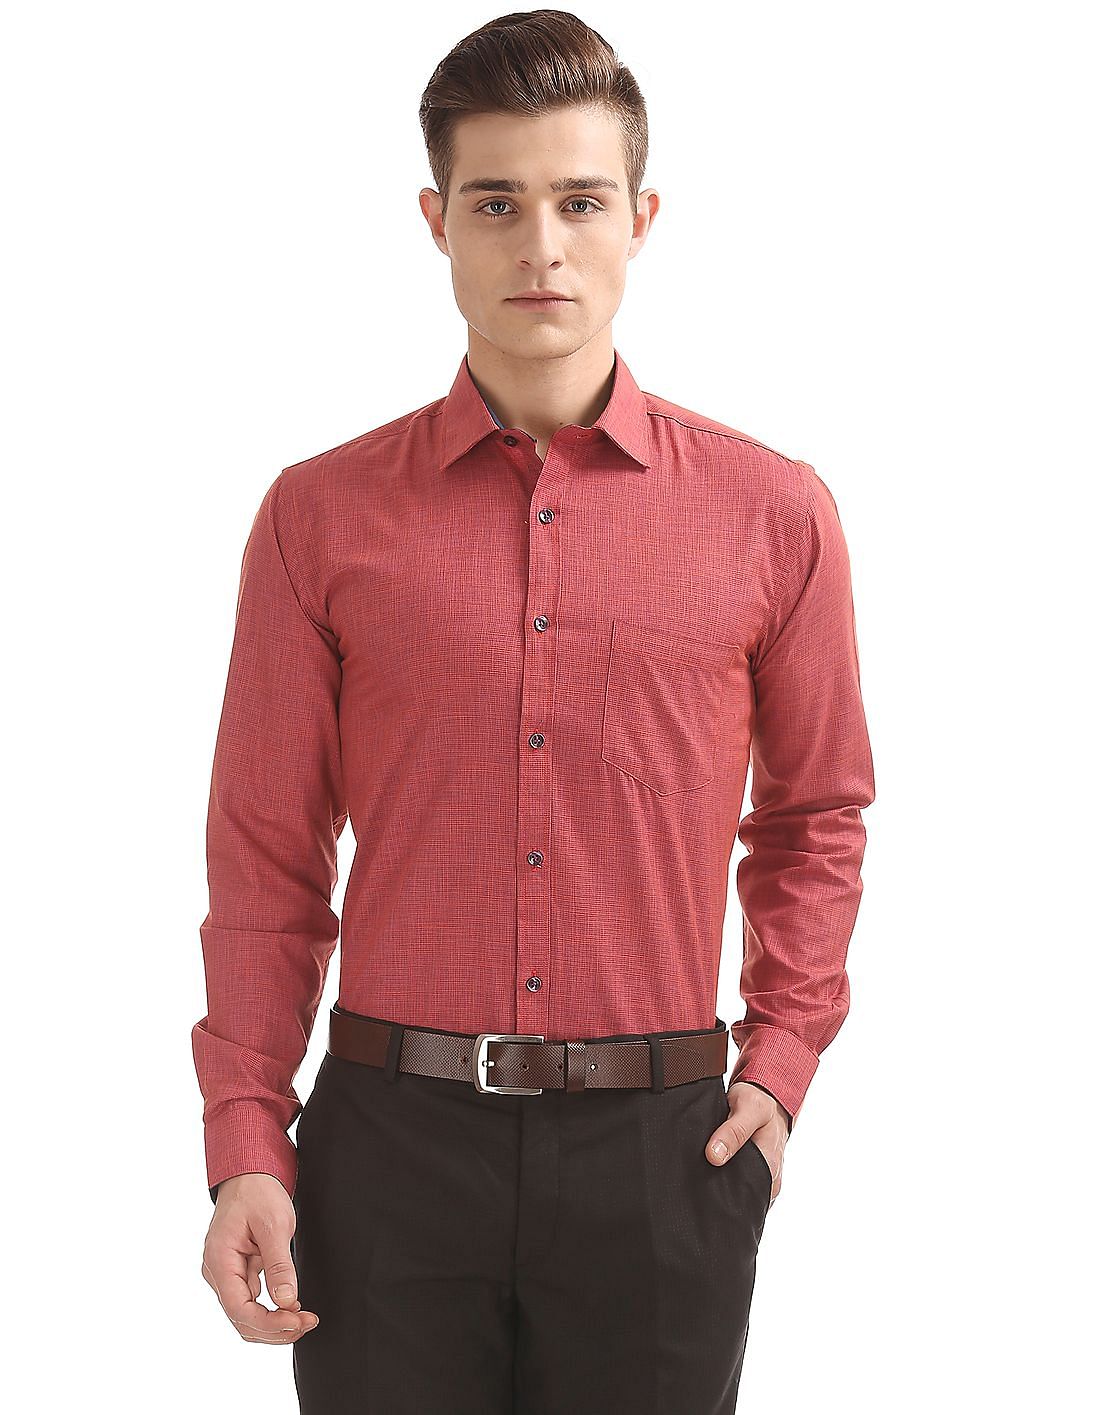 Buy Excalibur Classic Fit Patterned Shirt - NNNOW.com